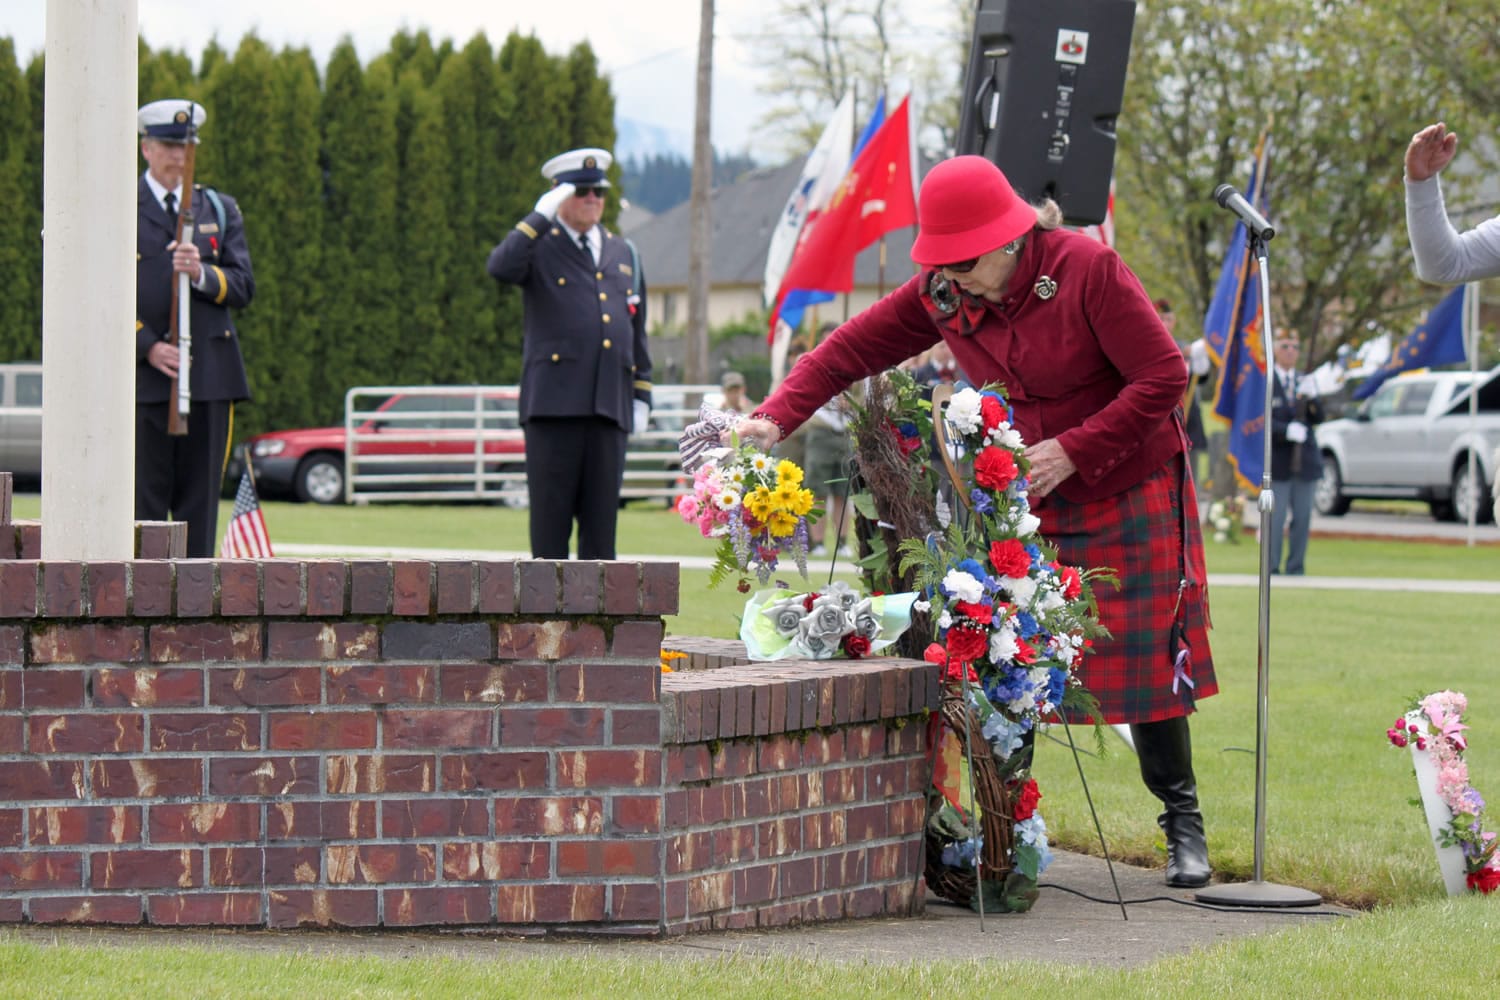 Ninety-four-year-old Lila Trammell, representing the Gold Star Mothers and wearing the Robertson family tartan, places a bouquet of flowers during the Memorial Day ceremony at the Washougal Memorial Cemetery. Trammell's mother, Inez Butler, was a member of the Gold Star Mothers, which is an organization of mothers who have lost a son or daughter serving in the military. Escorting Trammell on Monday were her brother, Harold Robertson, 90, and her son, Lyle Sanders, 73. Sanders said many members of his family have served in the military. &quot;That has been a tradition of our family,&quot; he said.  &quot;It's our country; we defend it.&quot; The event also included speeches by Dave Shoemaker and John Clapp.